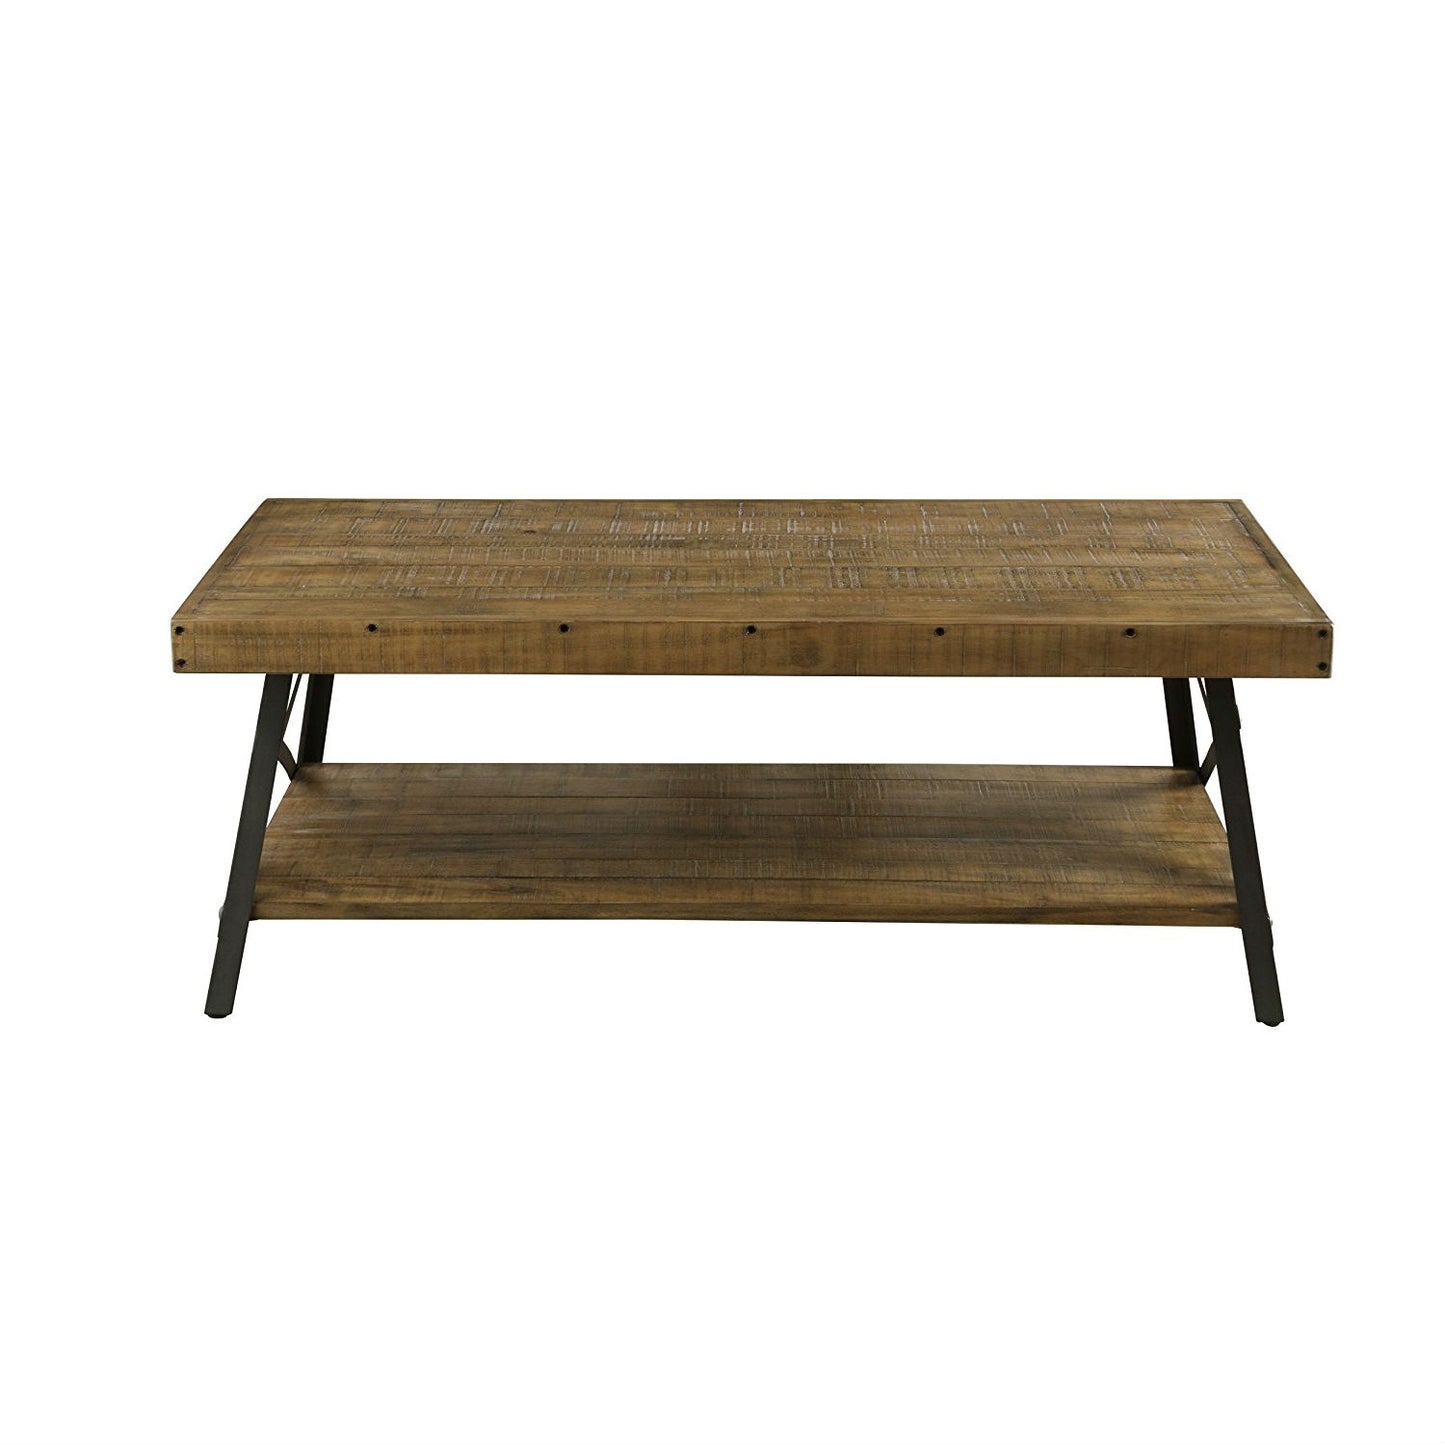 Modern Industrial Style Solid Wood Coffee Table with Steel Legs